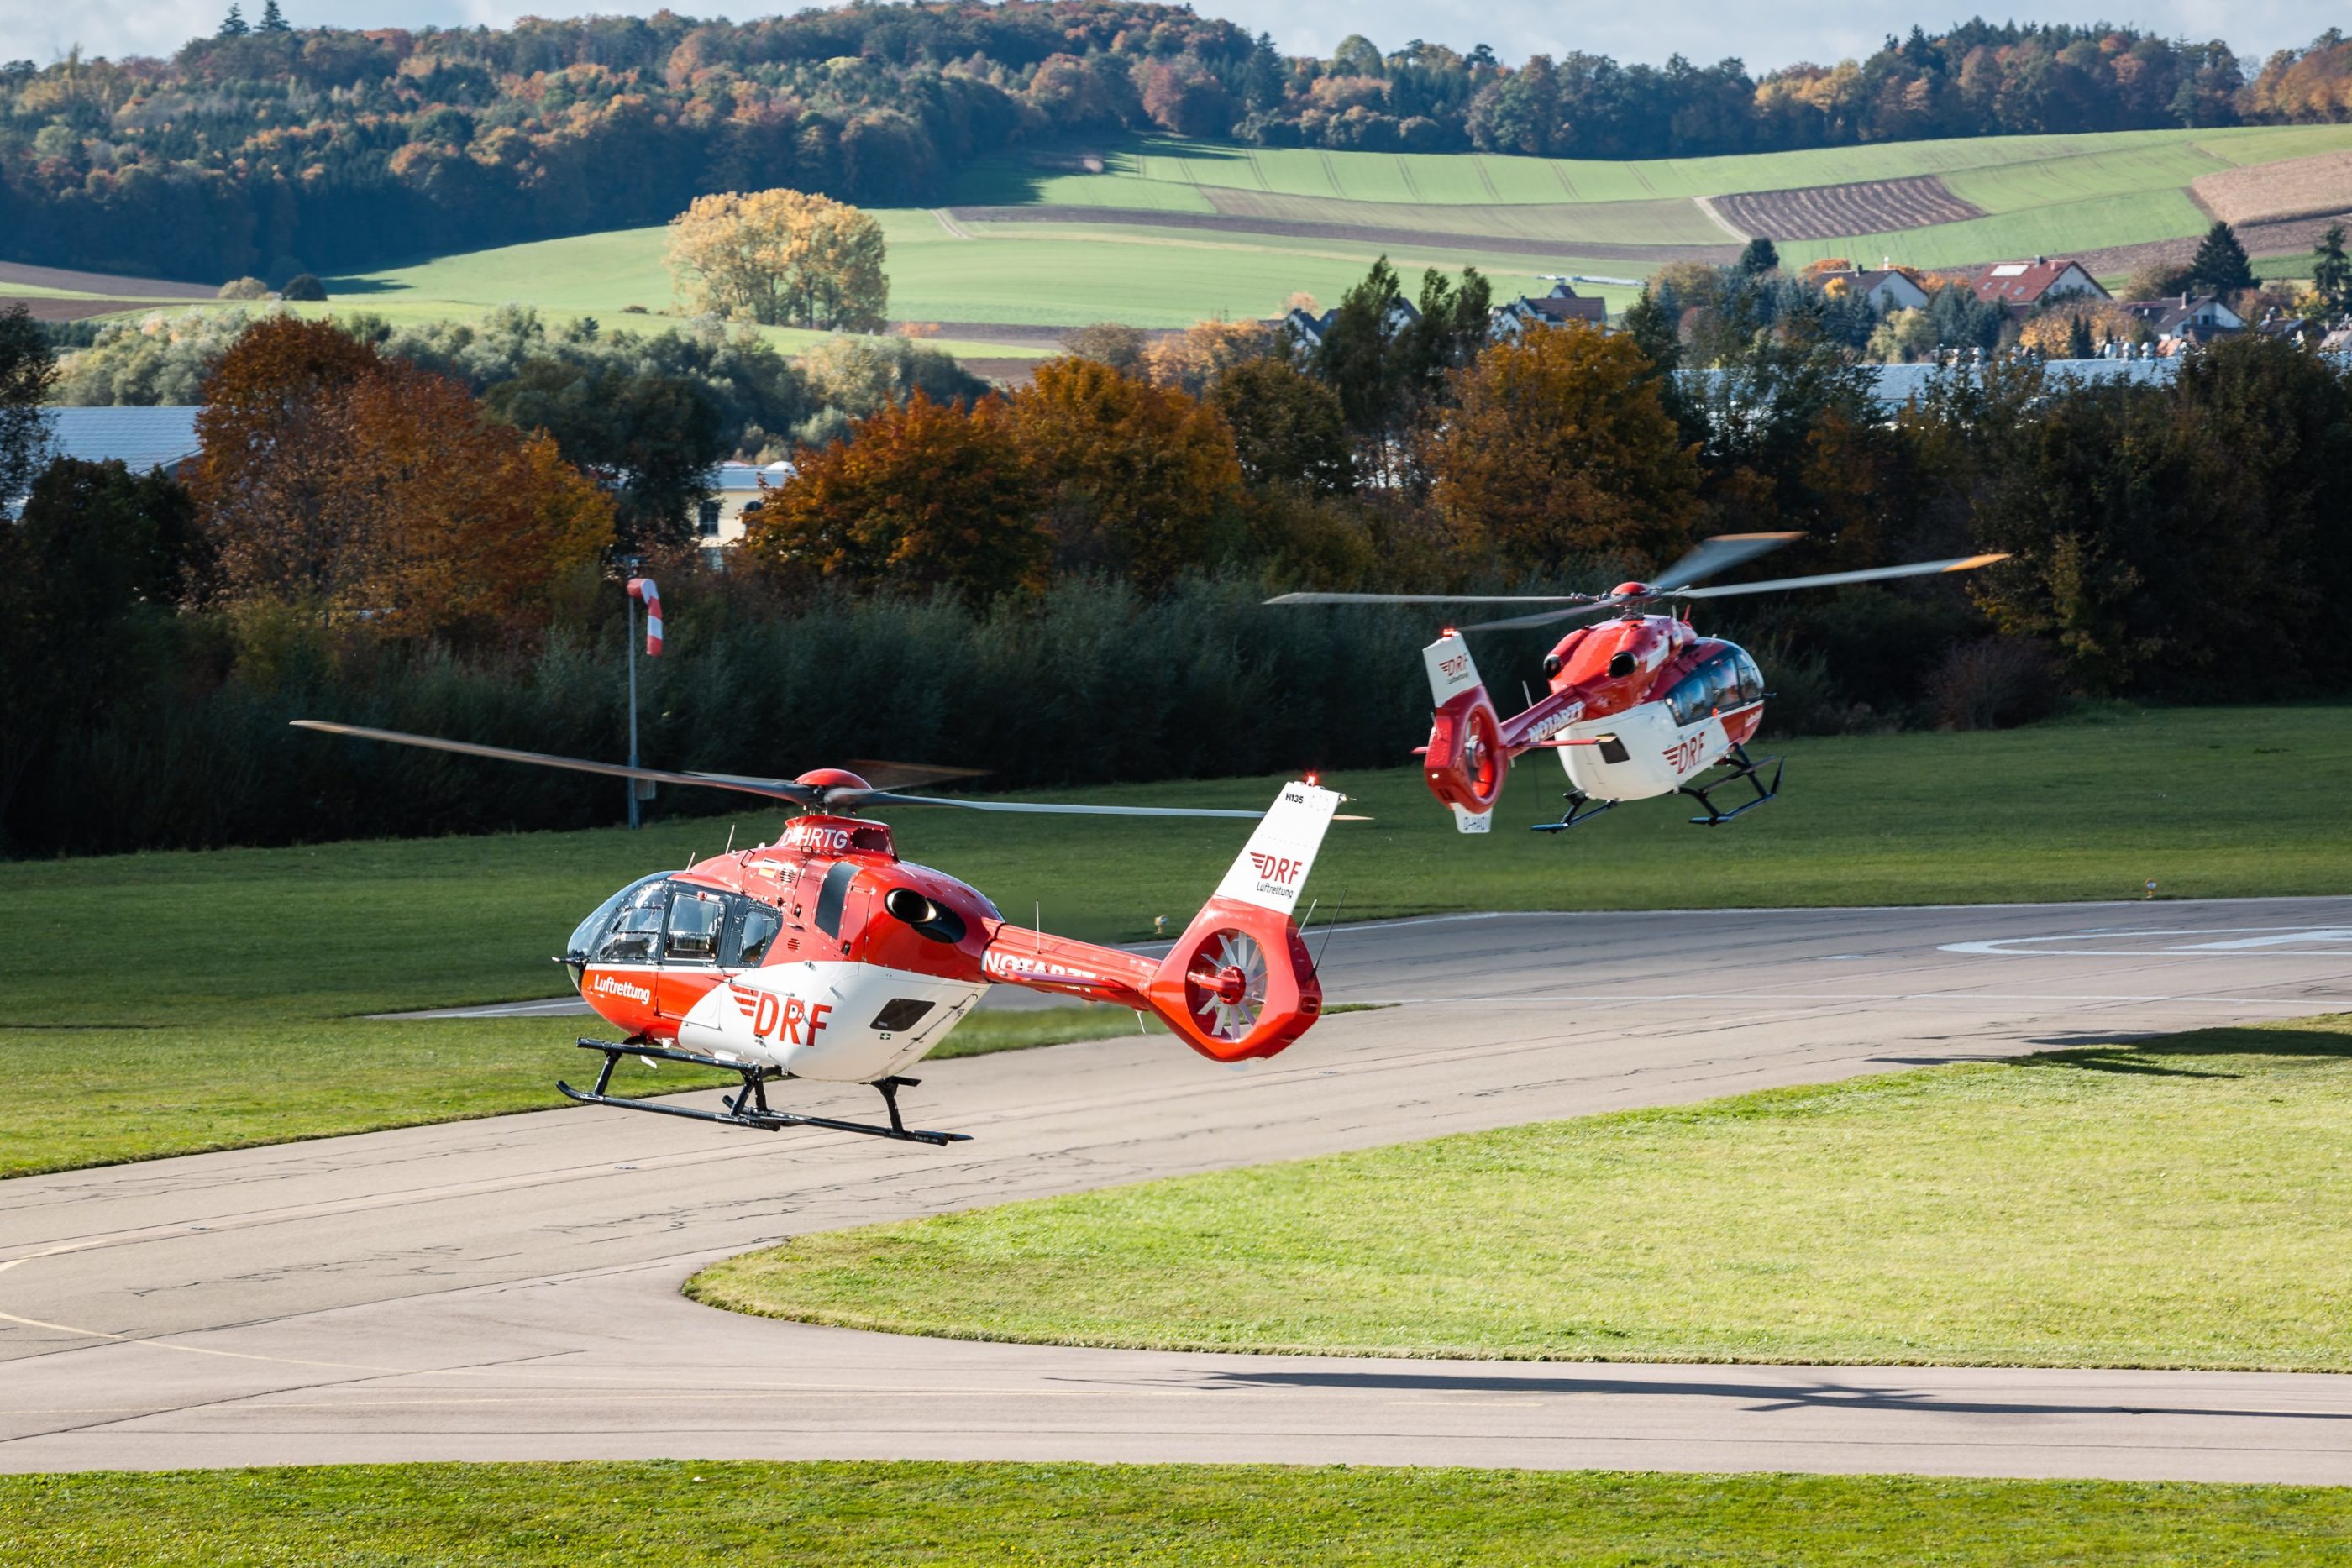 DRF Luftrettung recently took delivery of a new H135 and H145 from Airbus Helicopters' facility in Donauworth, Germany. Airbus Helicopters/Patrick Heinz Photo